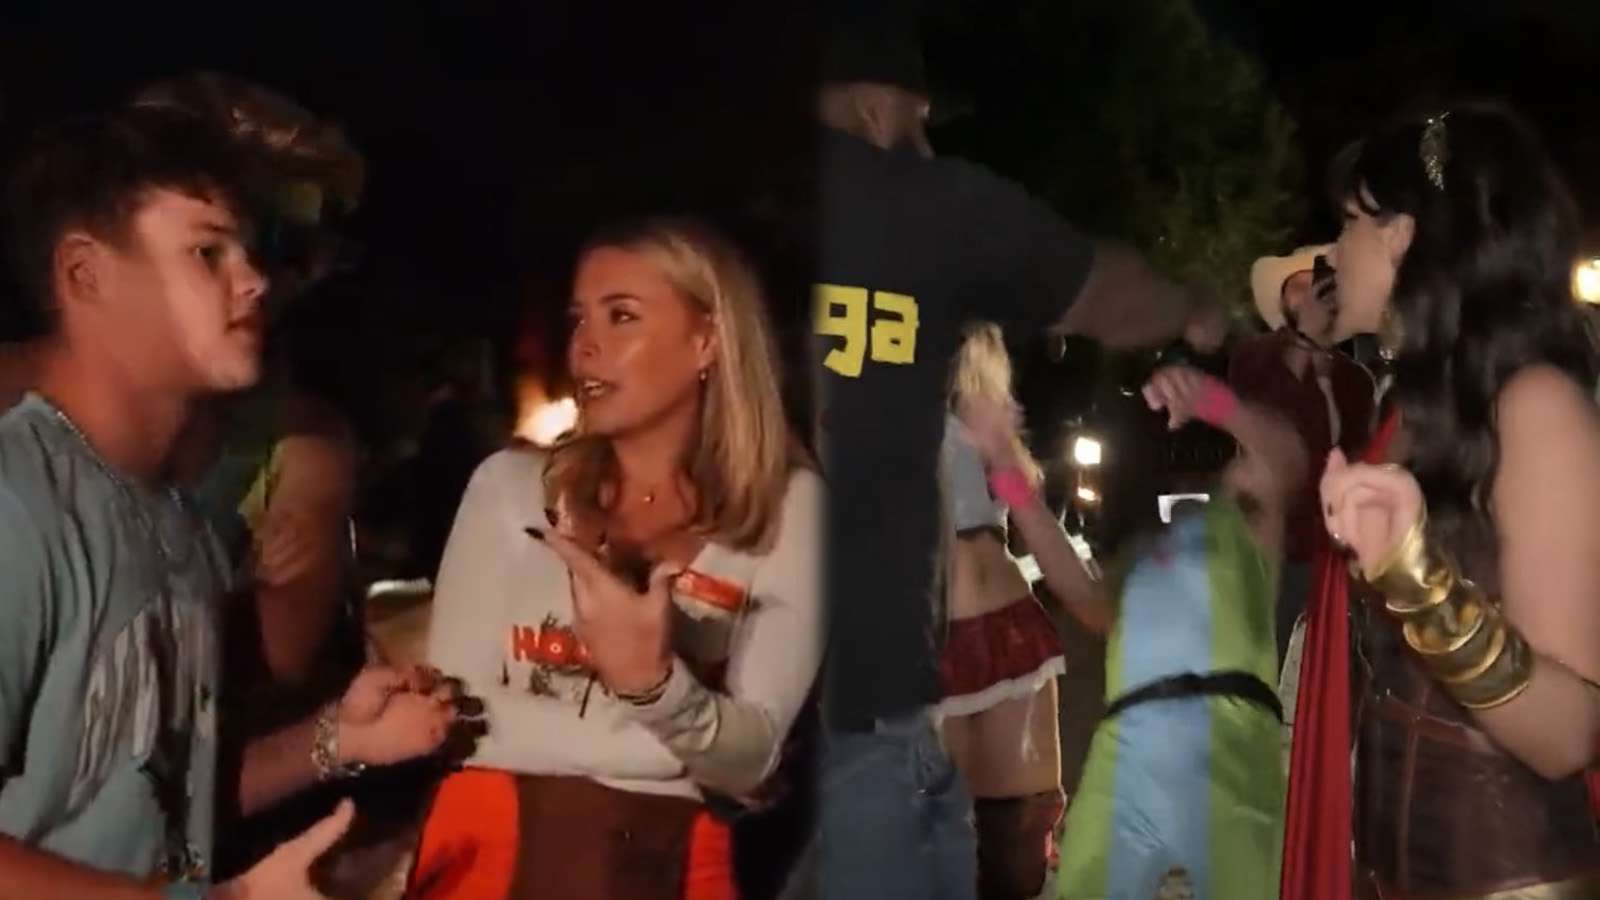 Corinna Kopf furious after Jack Doherty's bodyguard punches friend at Halloween party